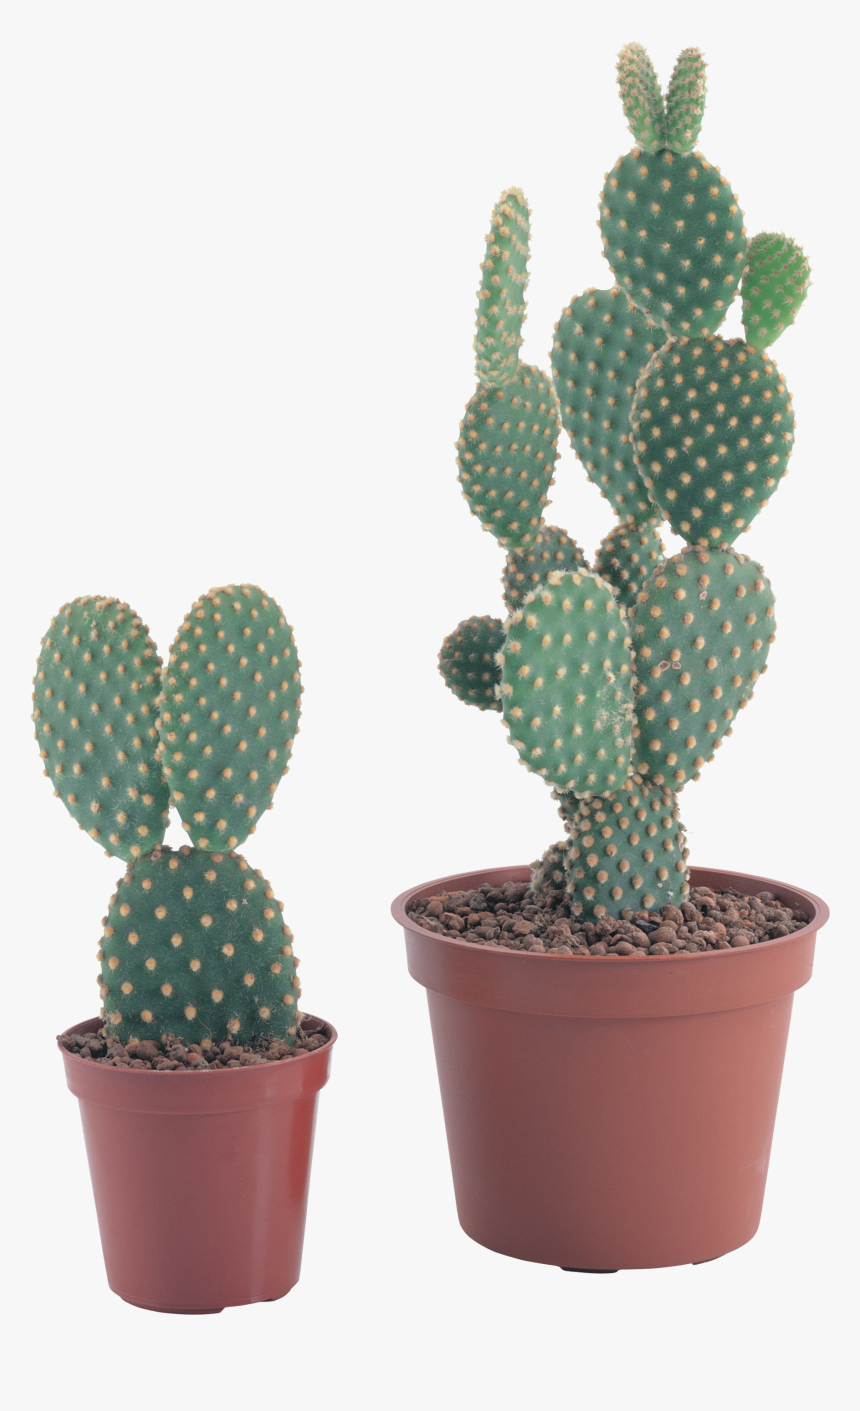 Cactus Png Image - Transparent Background Potted Cactus Png, Png Download, Free Download